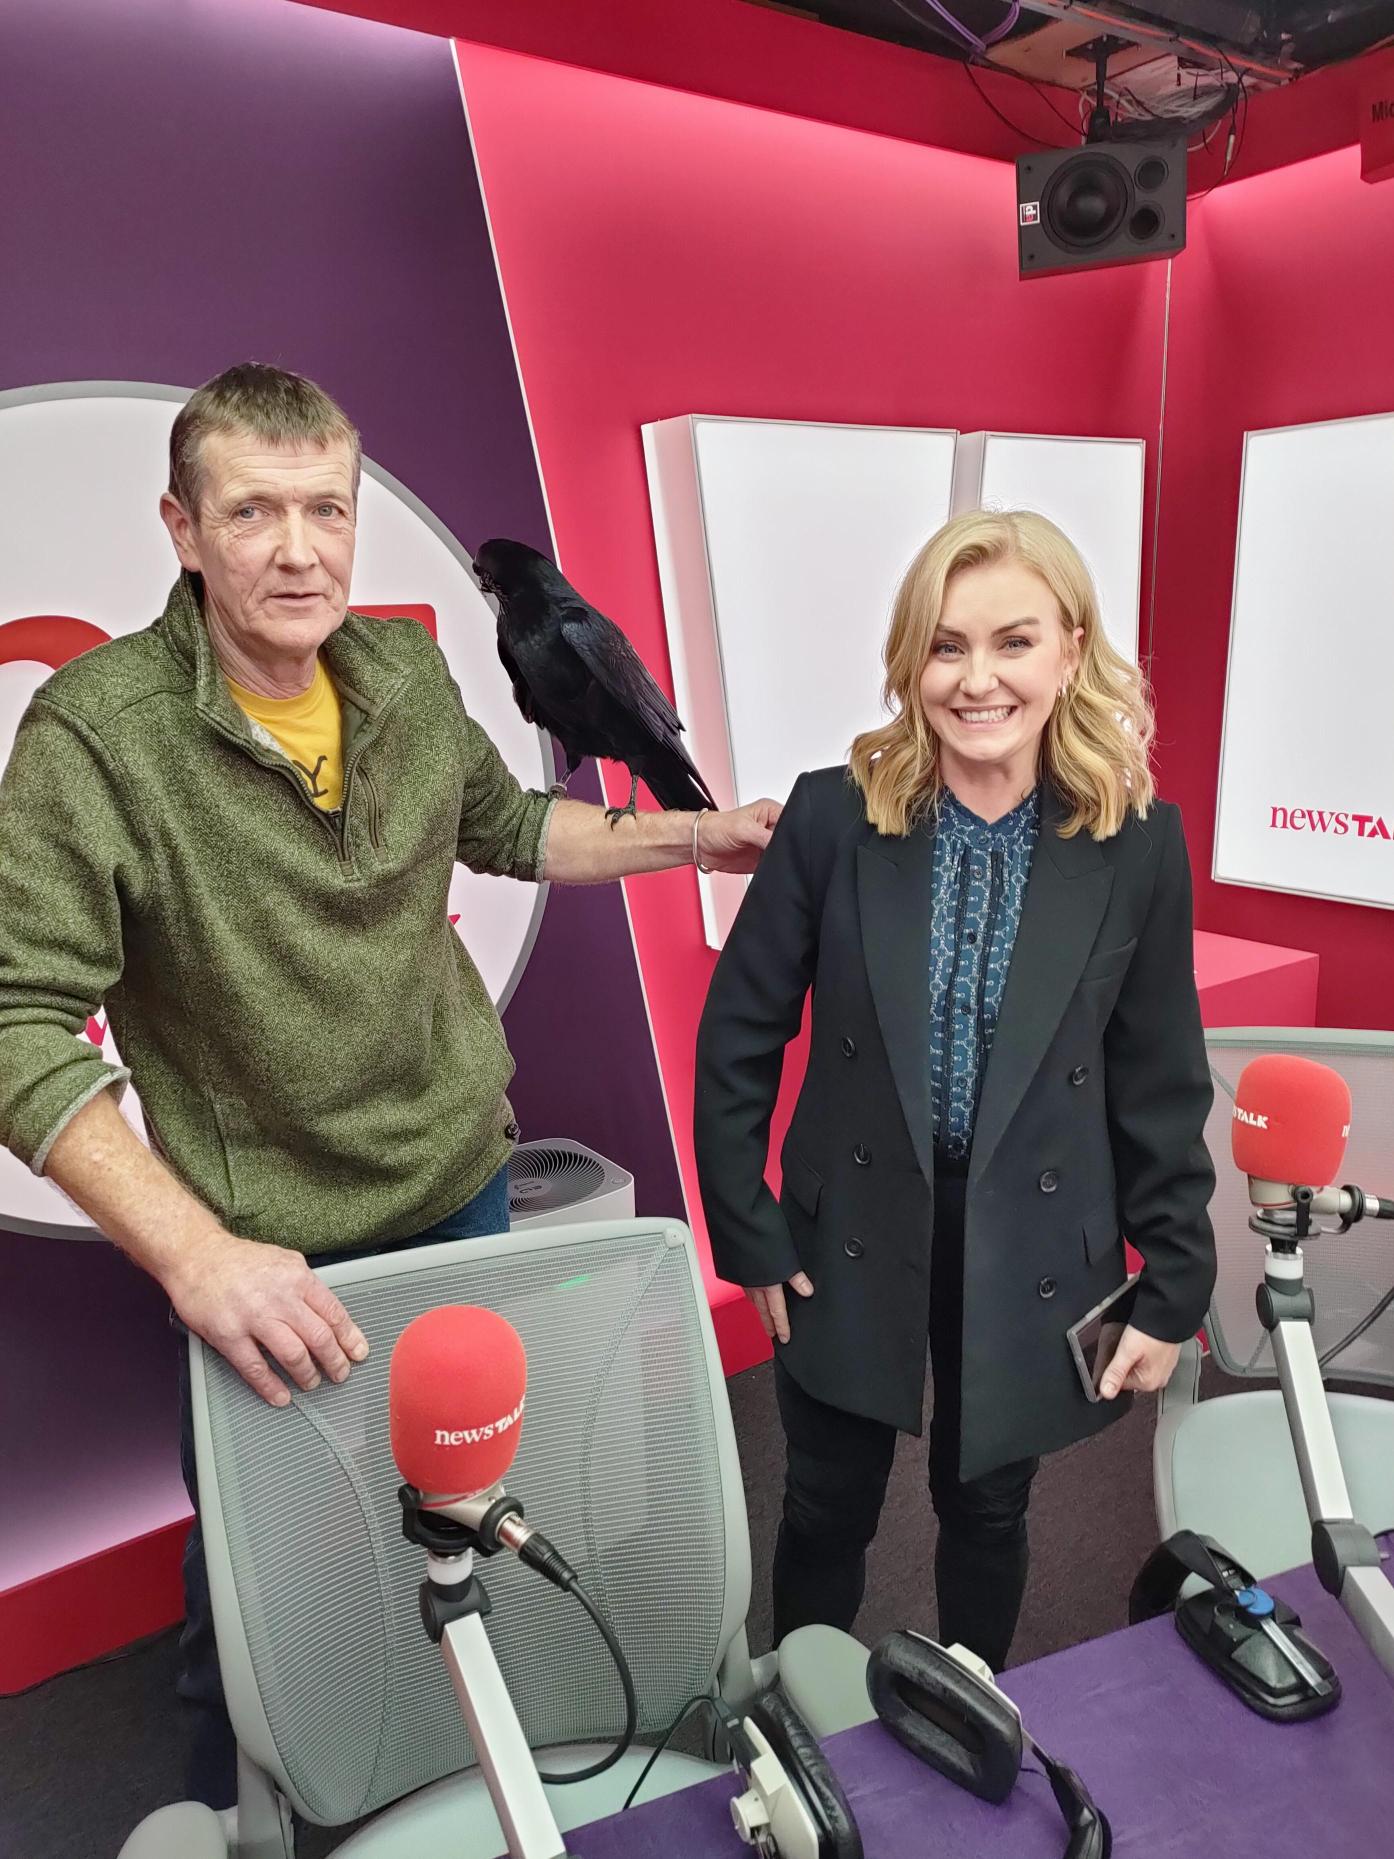 Eddie Drew and Soot with Lunchtime Live host Mairead Ronan